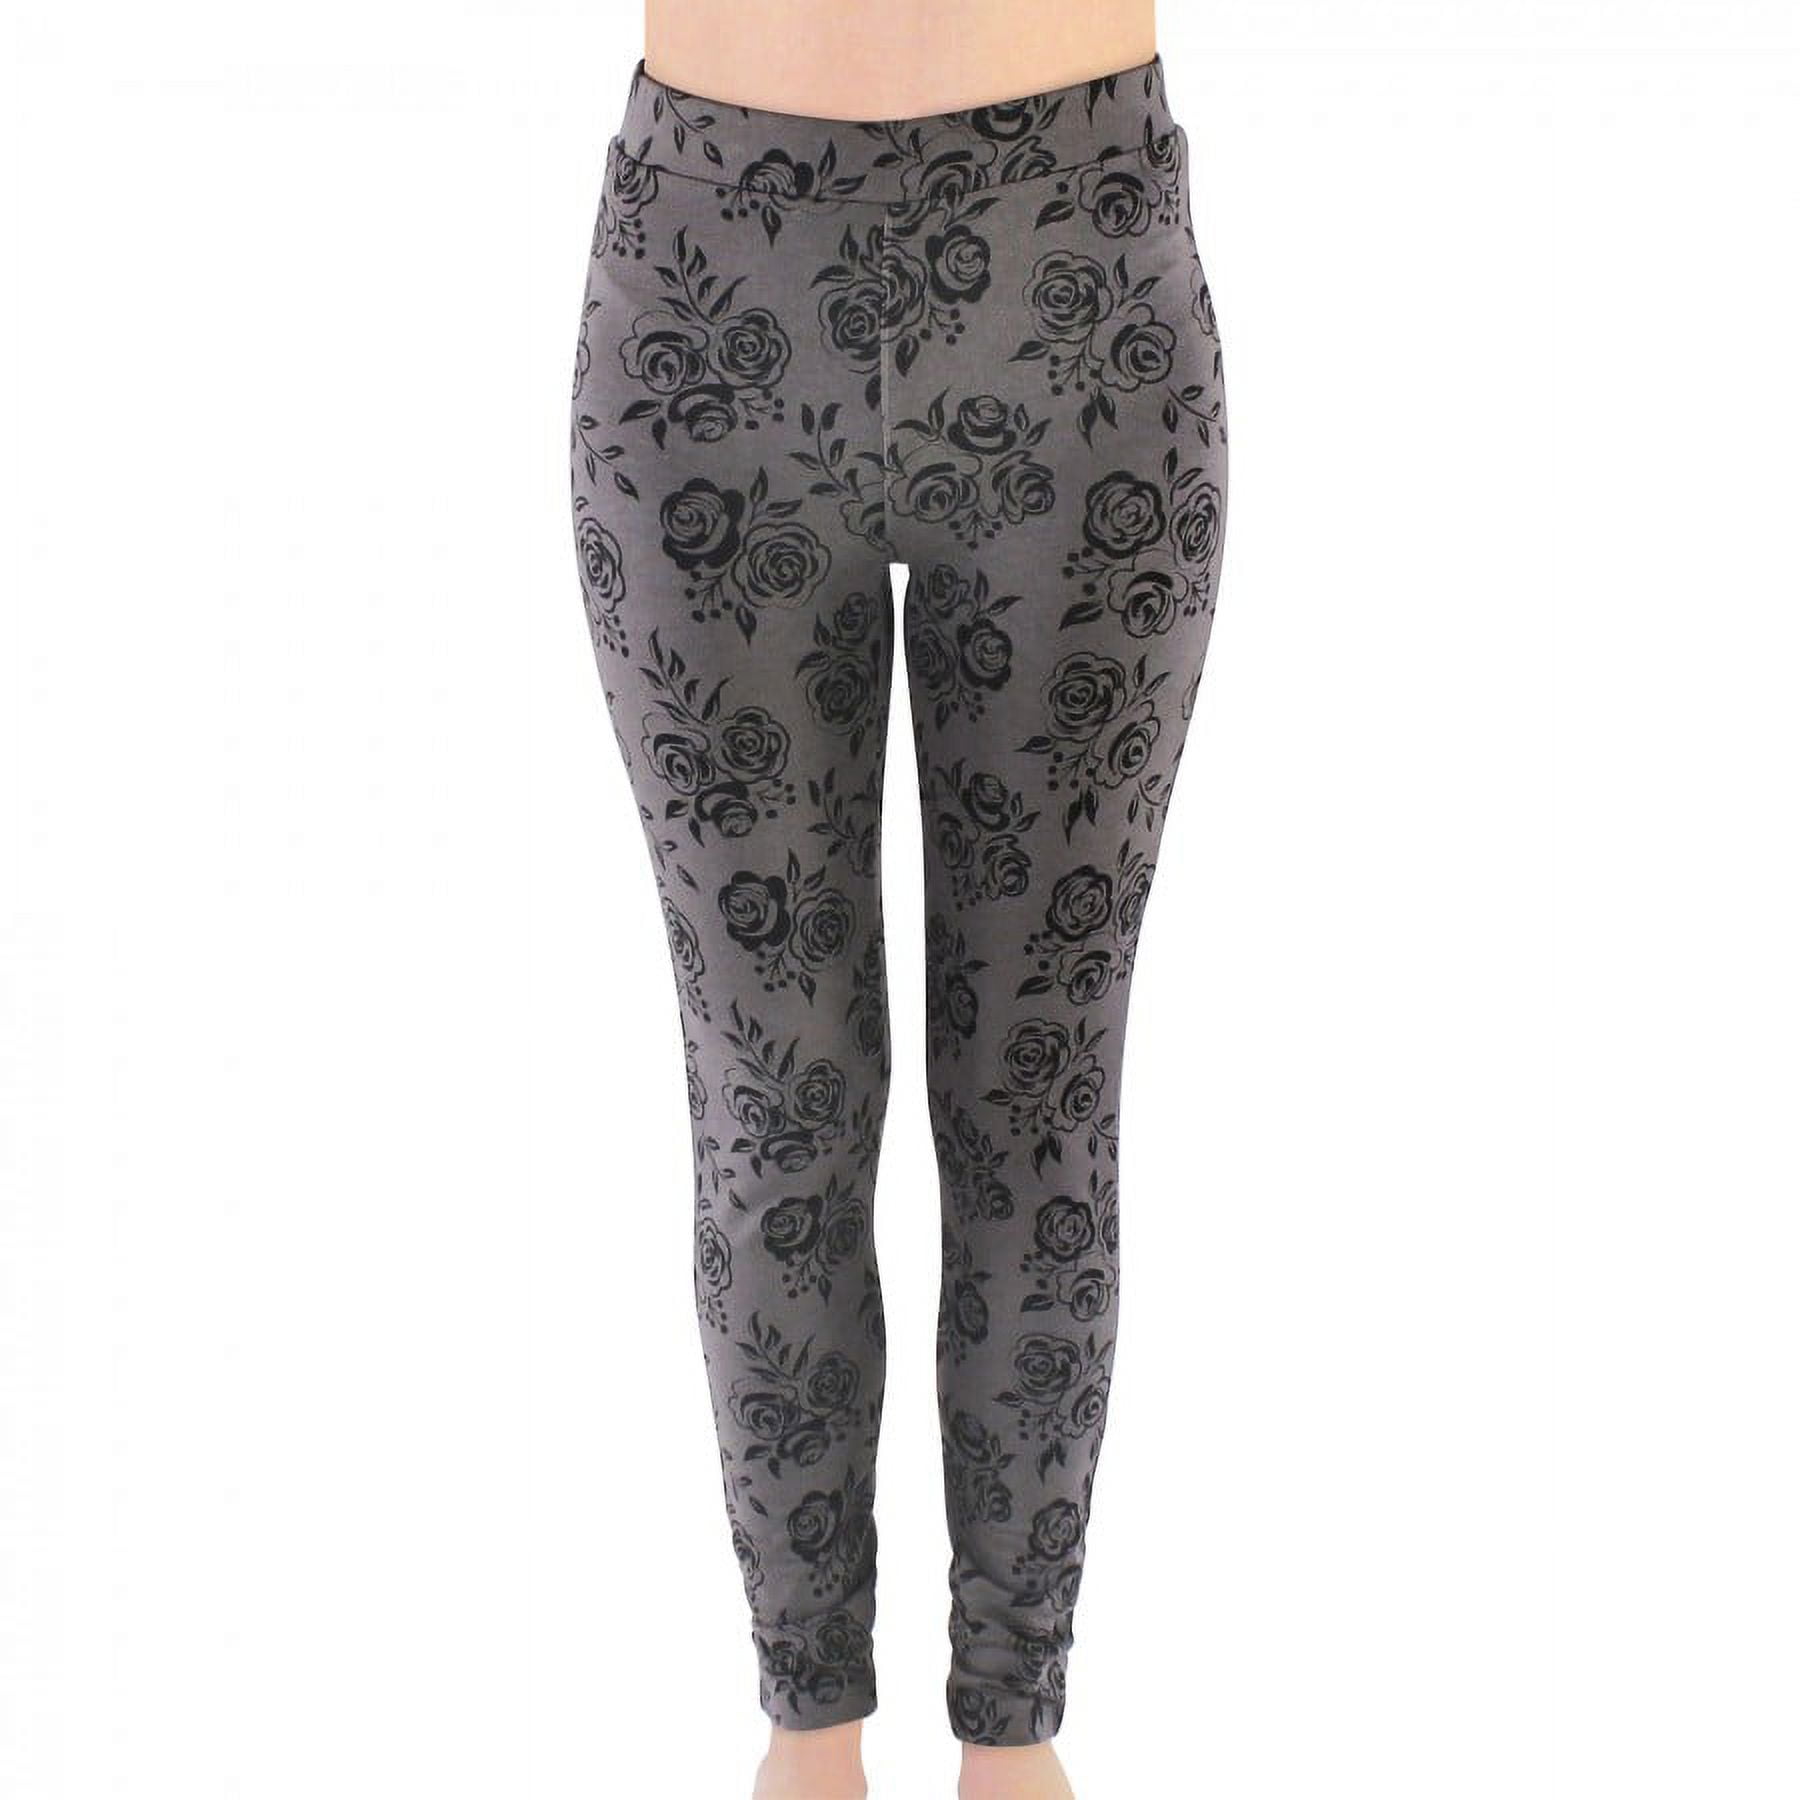 Touched by Nature Womens Organic Cotton Leggings, Black Floral, Medium 